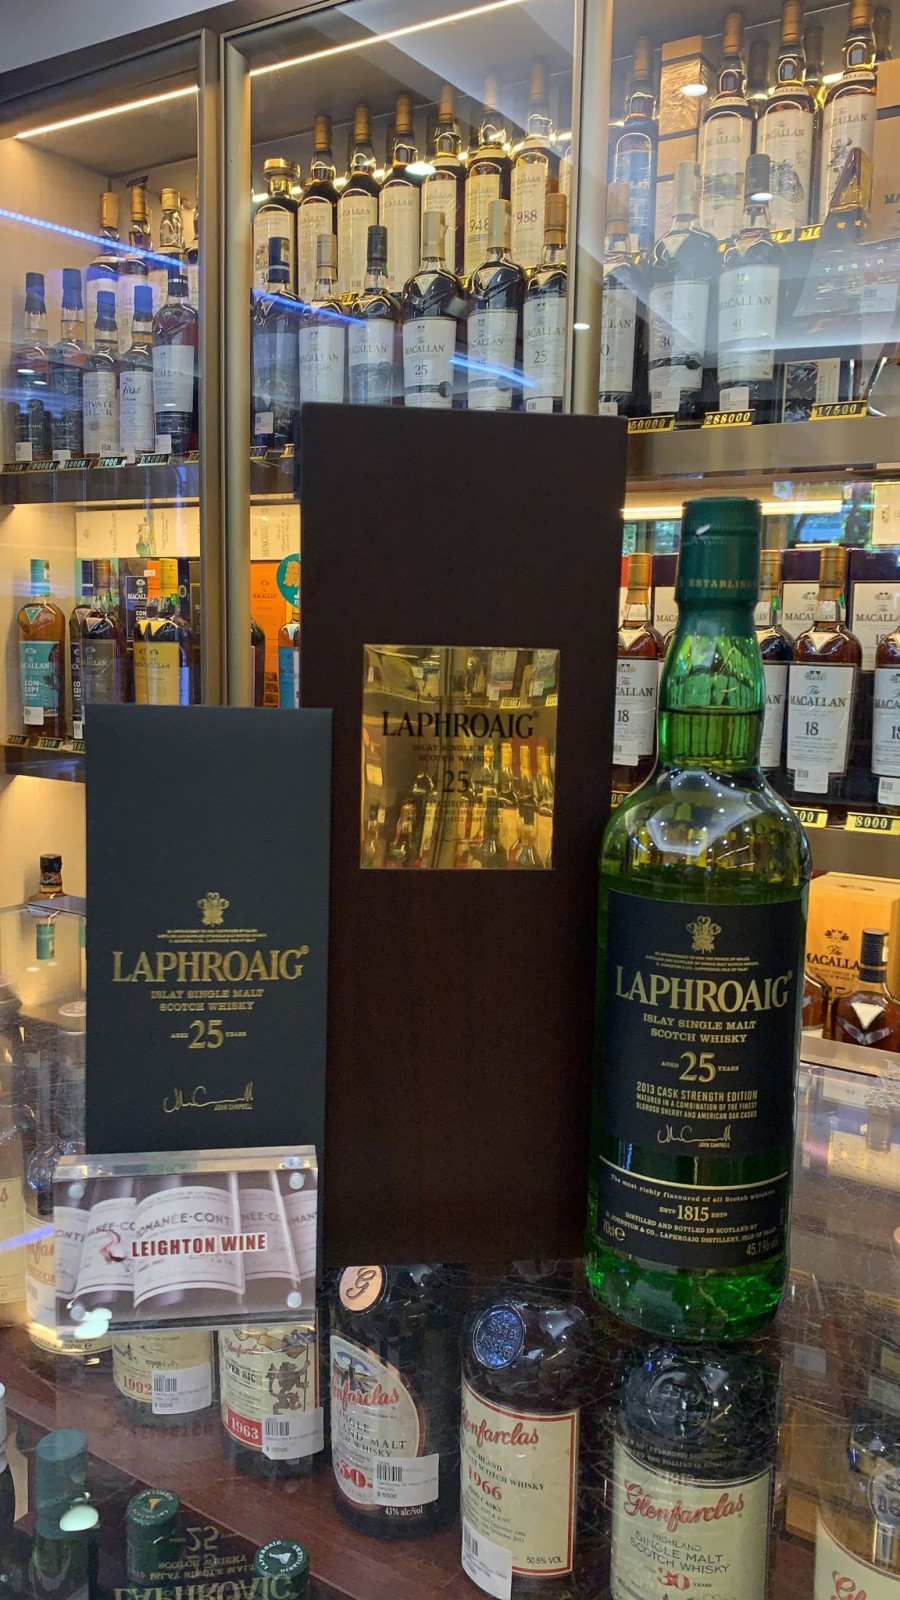 Laphroaig 25 Year Old Cask Strength (2013 Release) (70cl, 45.1%)